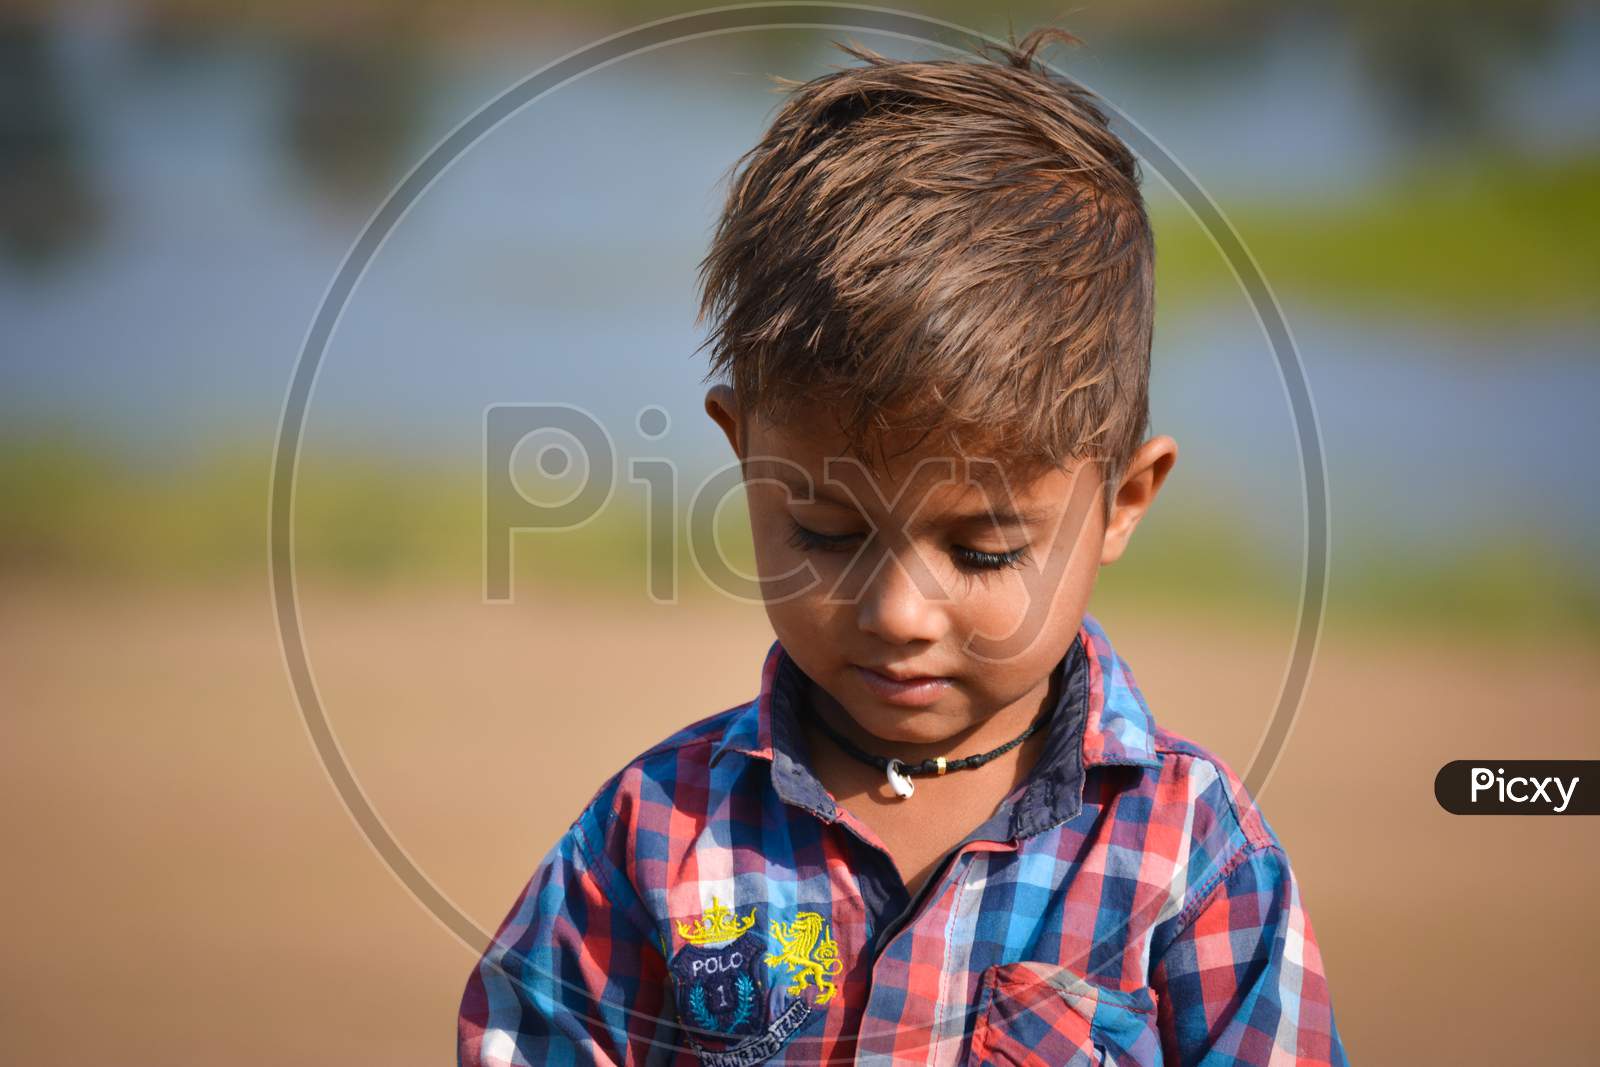 TIKAMGARH, MADHYA PRADESH, INDIA - NOVEMBER 20, 2019: Happy little indian boy with expression in outdoor.